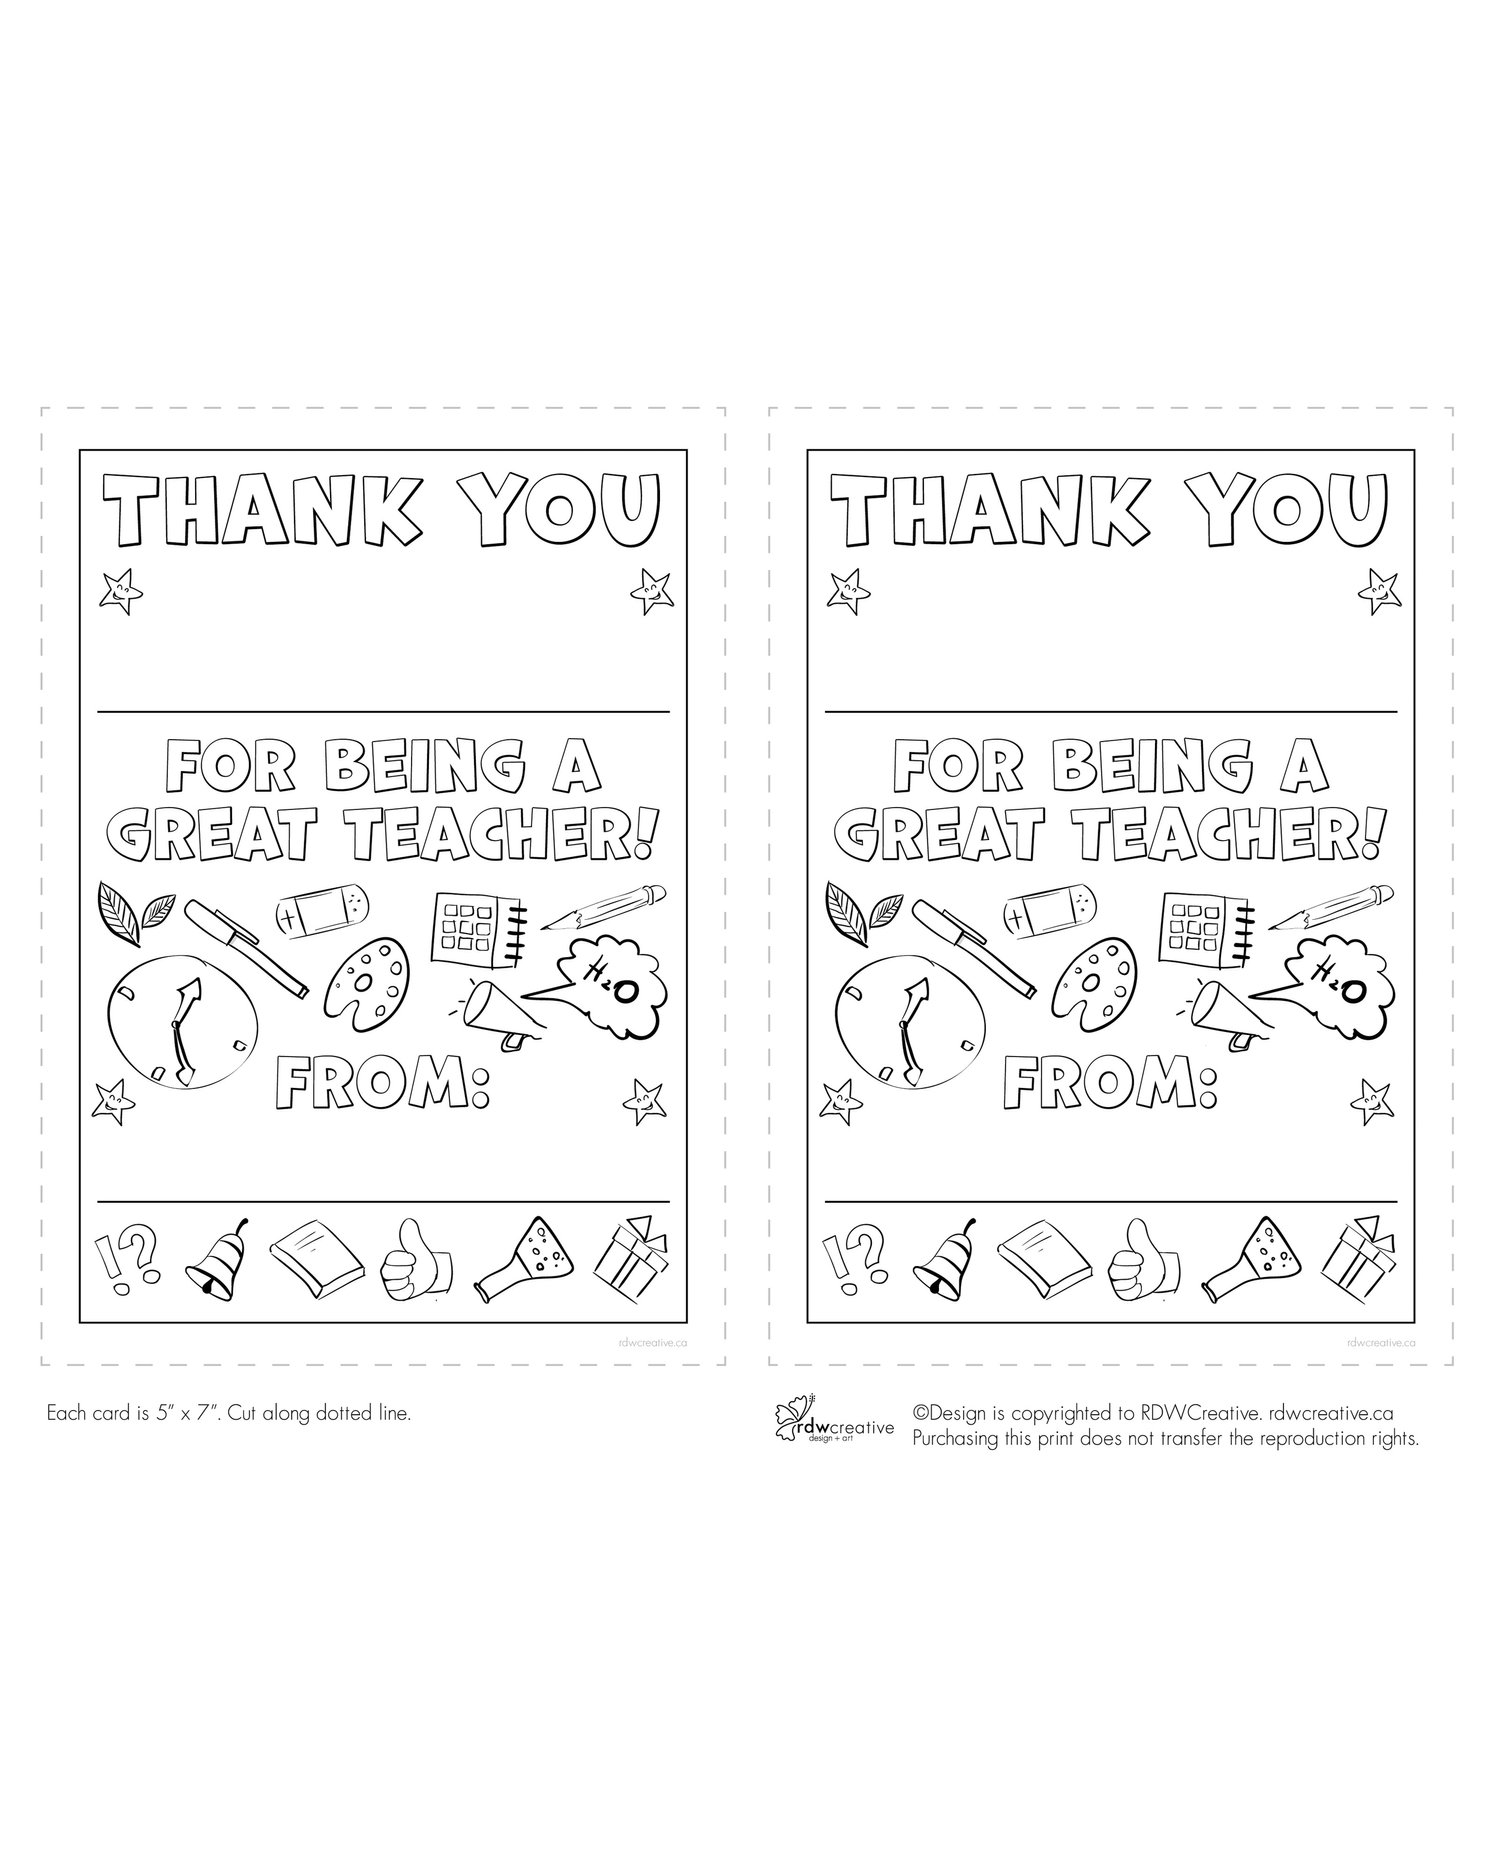 Thank you for being a great teacher by x colouring sheet â